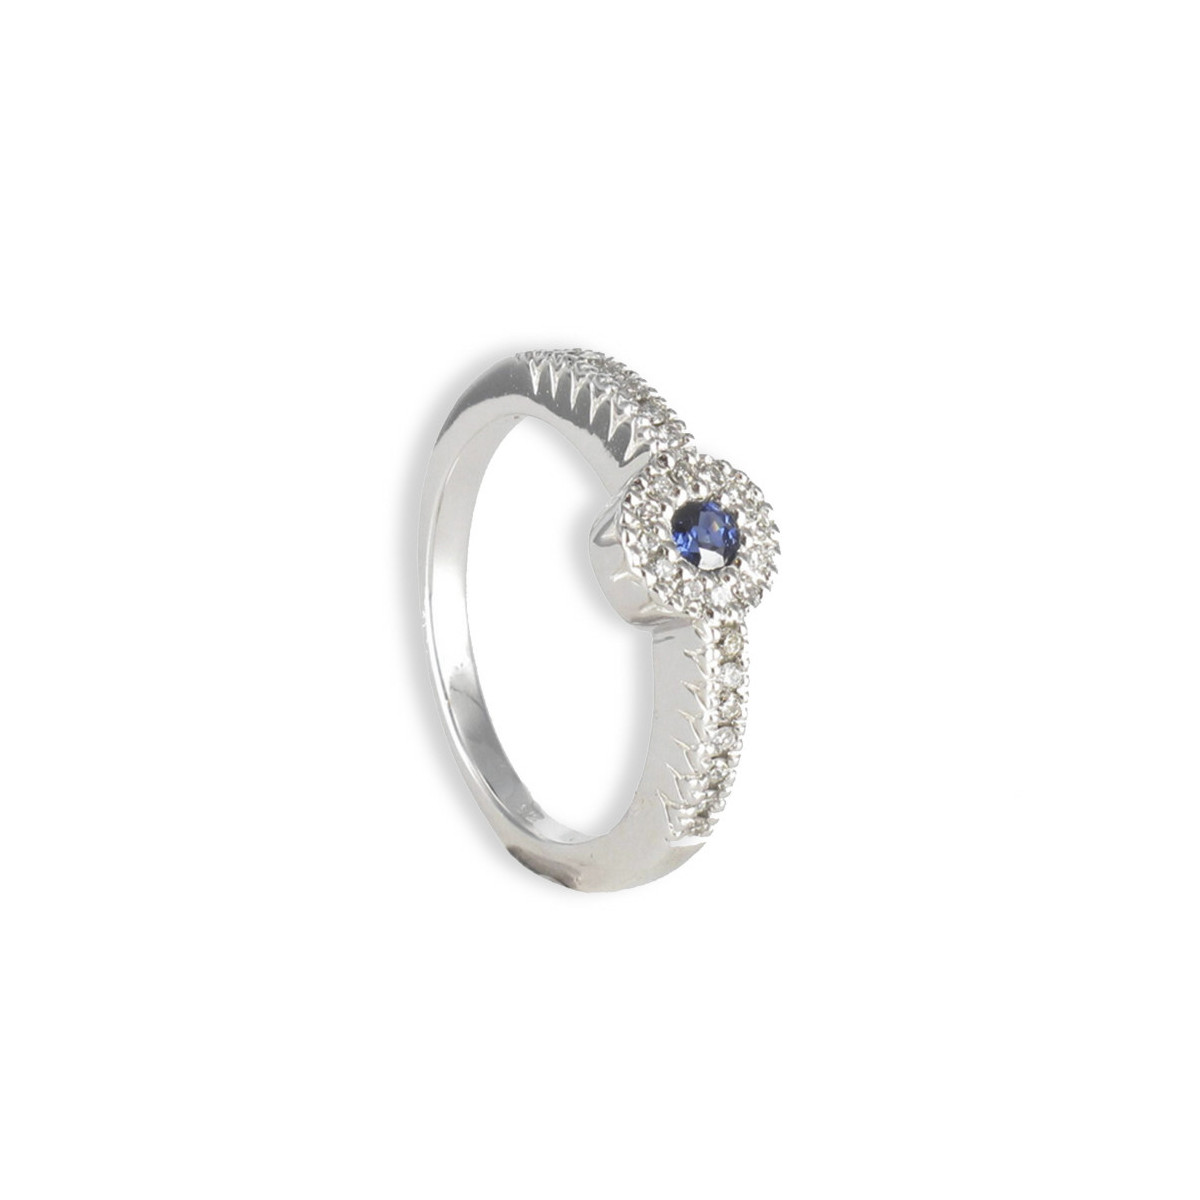 FINE RING WITH DIAMONDS AND BLUE STONE